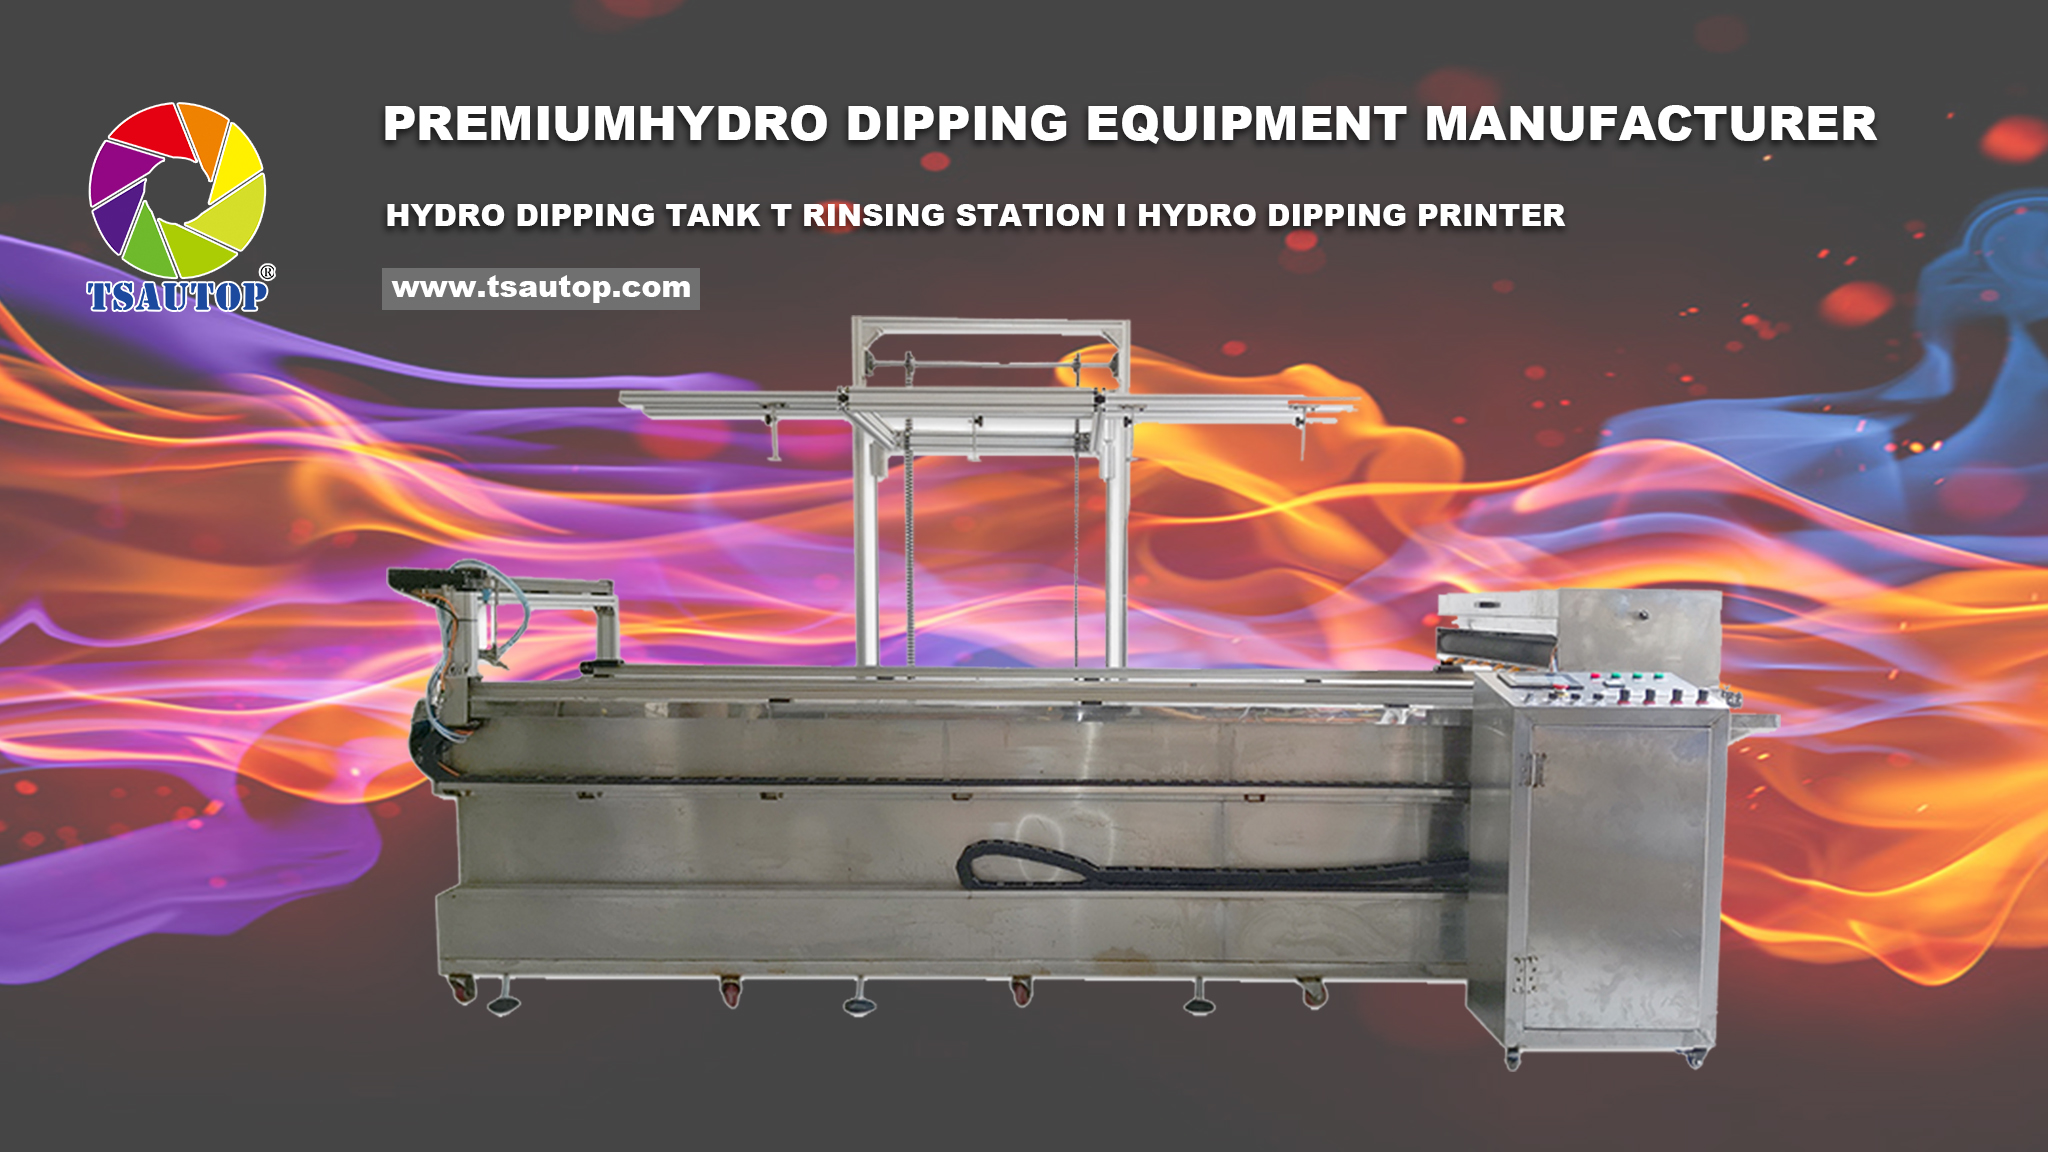 Fully Automatic Hydro Dipping Machine for dipping Appliance Cover